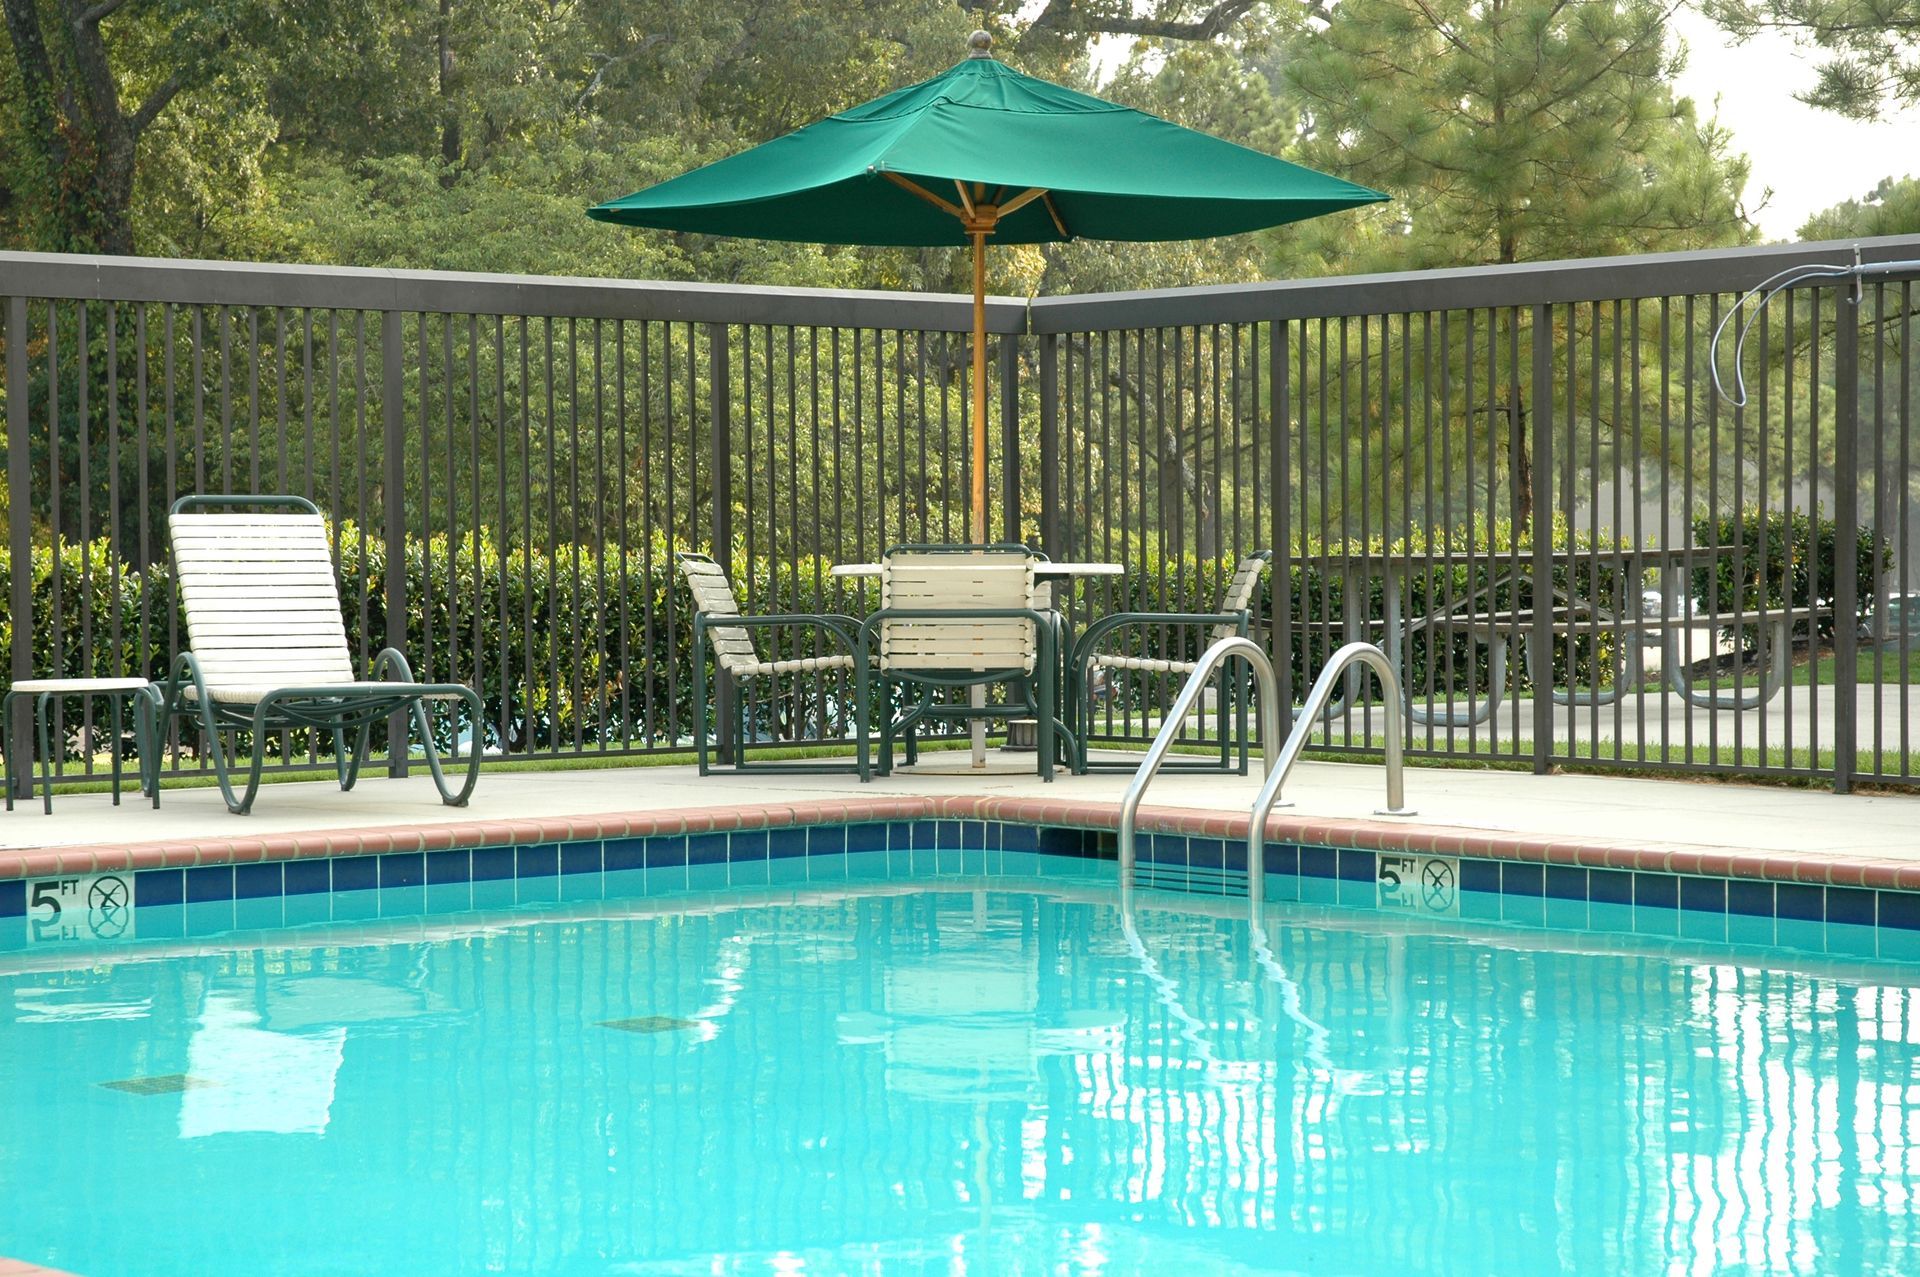 Peaceful Poolside Scene, with Umbrella, Table, and Chairs | Sydney, Nsw | Mick's Pool Safety